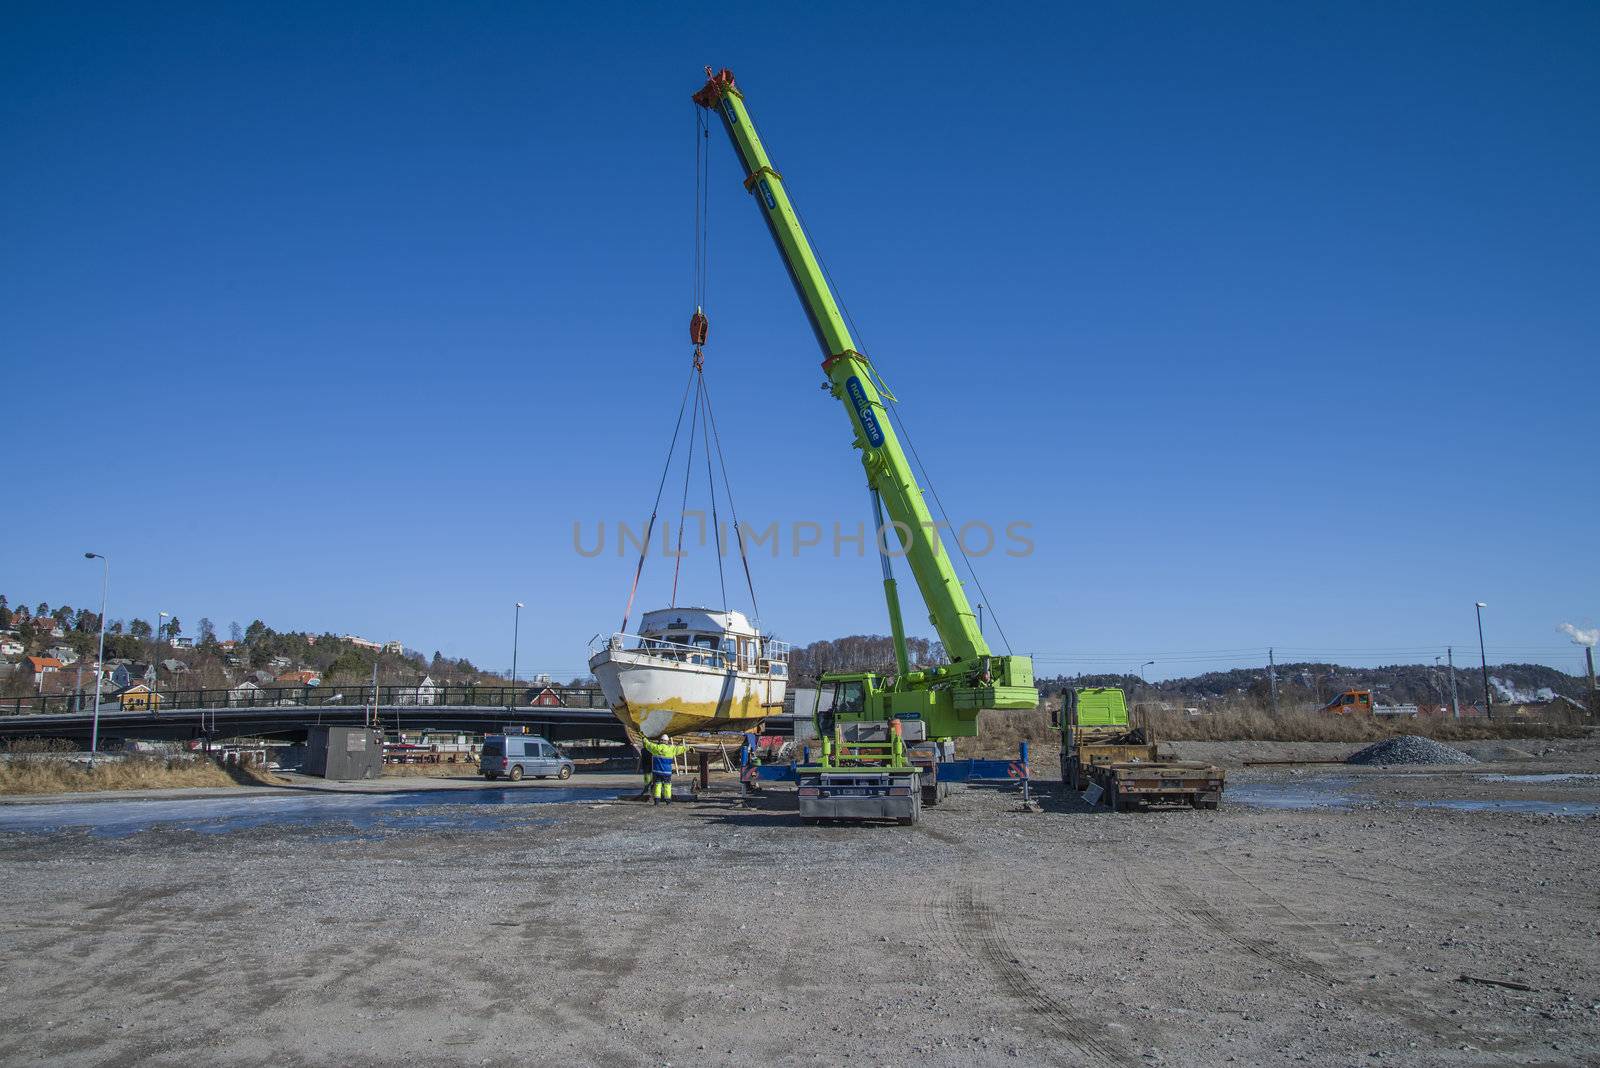 The boat was transported by trailer and was unloaded with a huge mobile crane on the quay at the port of Halden, Norway. The picture is shot one day in March.